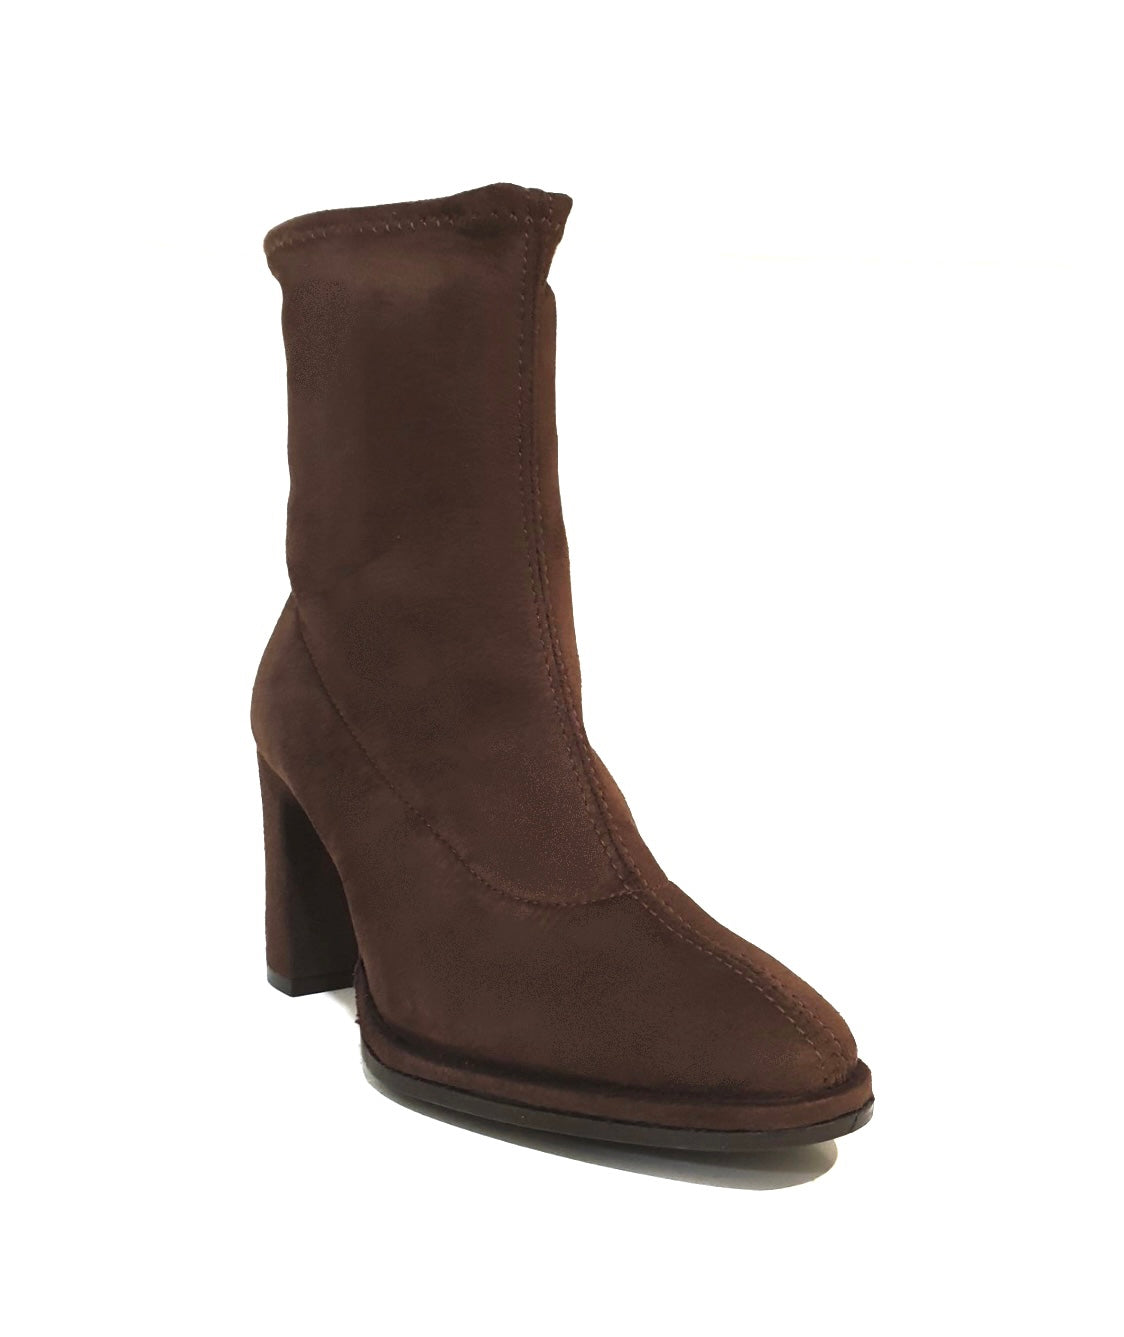 Wonders M-5104 Marron Brown Suede Leather Stretch Sarga Zip Ankle Boot Made In Spain